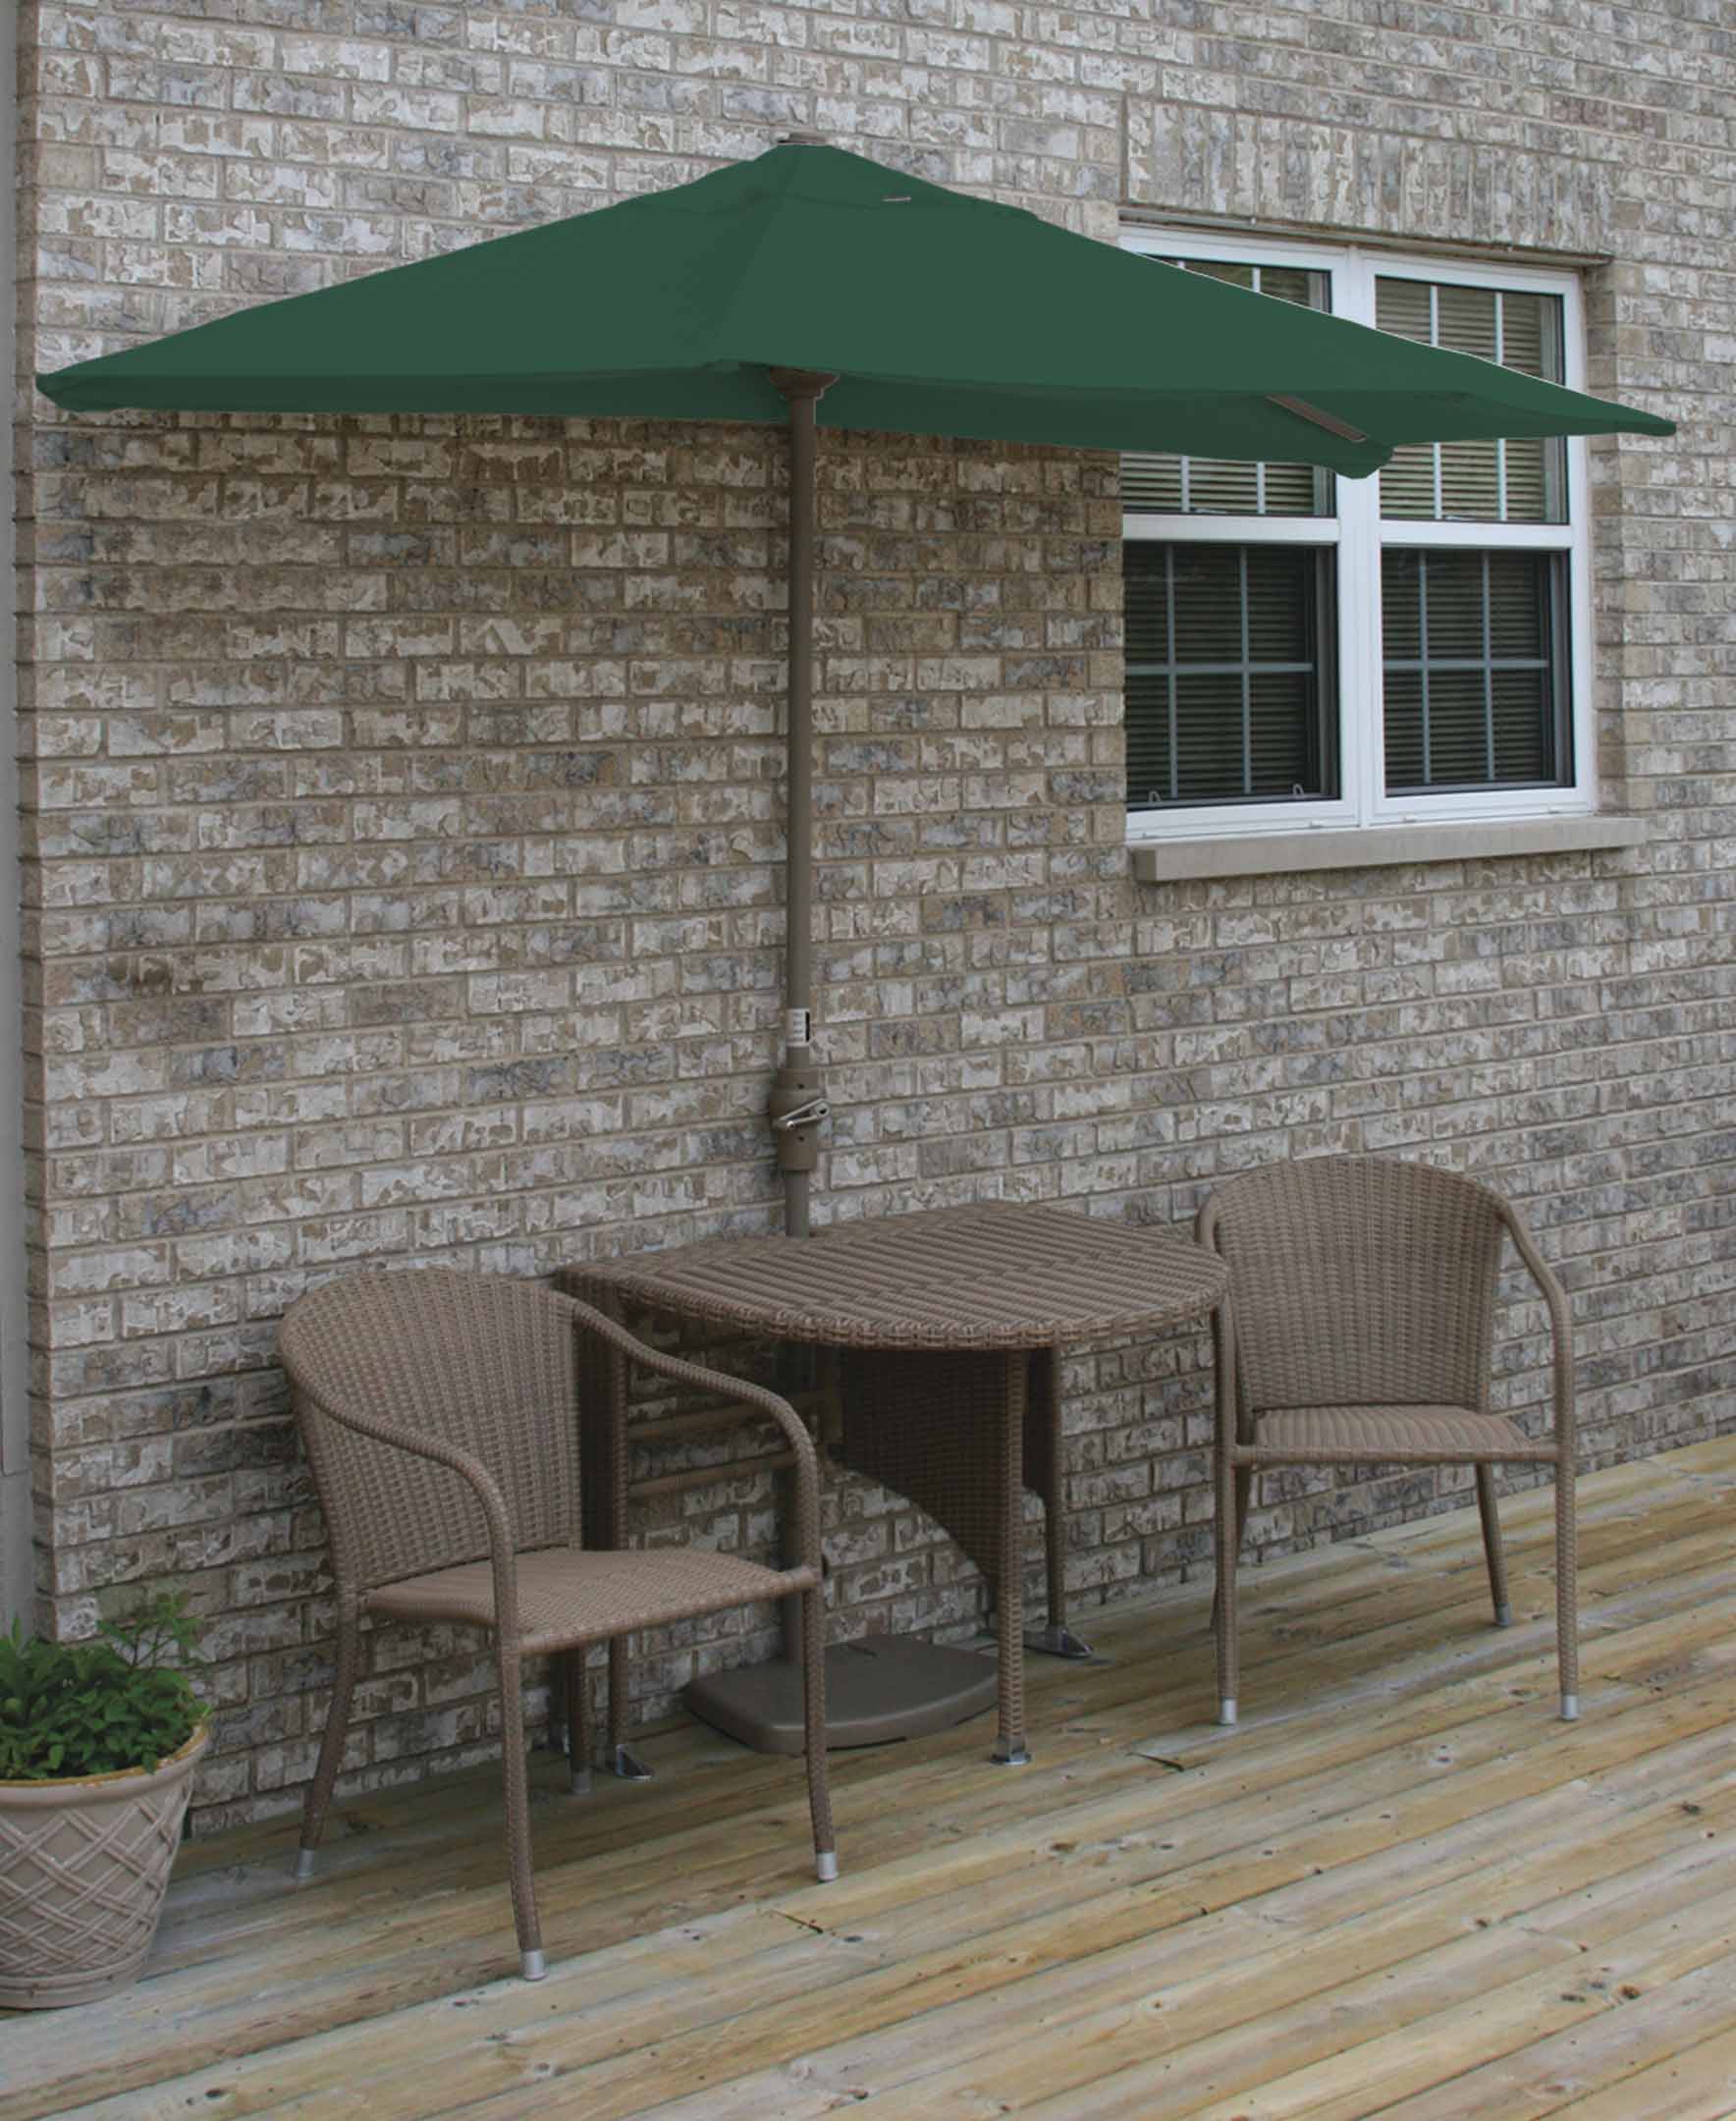 Blue Star Group Terrace Mates Adena All-Weather Wicker Coffee Color Table Set w/ 9'-Wide OFF-THE-WALL BRELLA - Green SolarVista Canopy - image 2 of 7